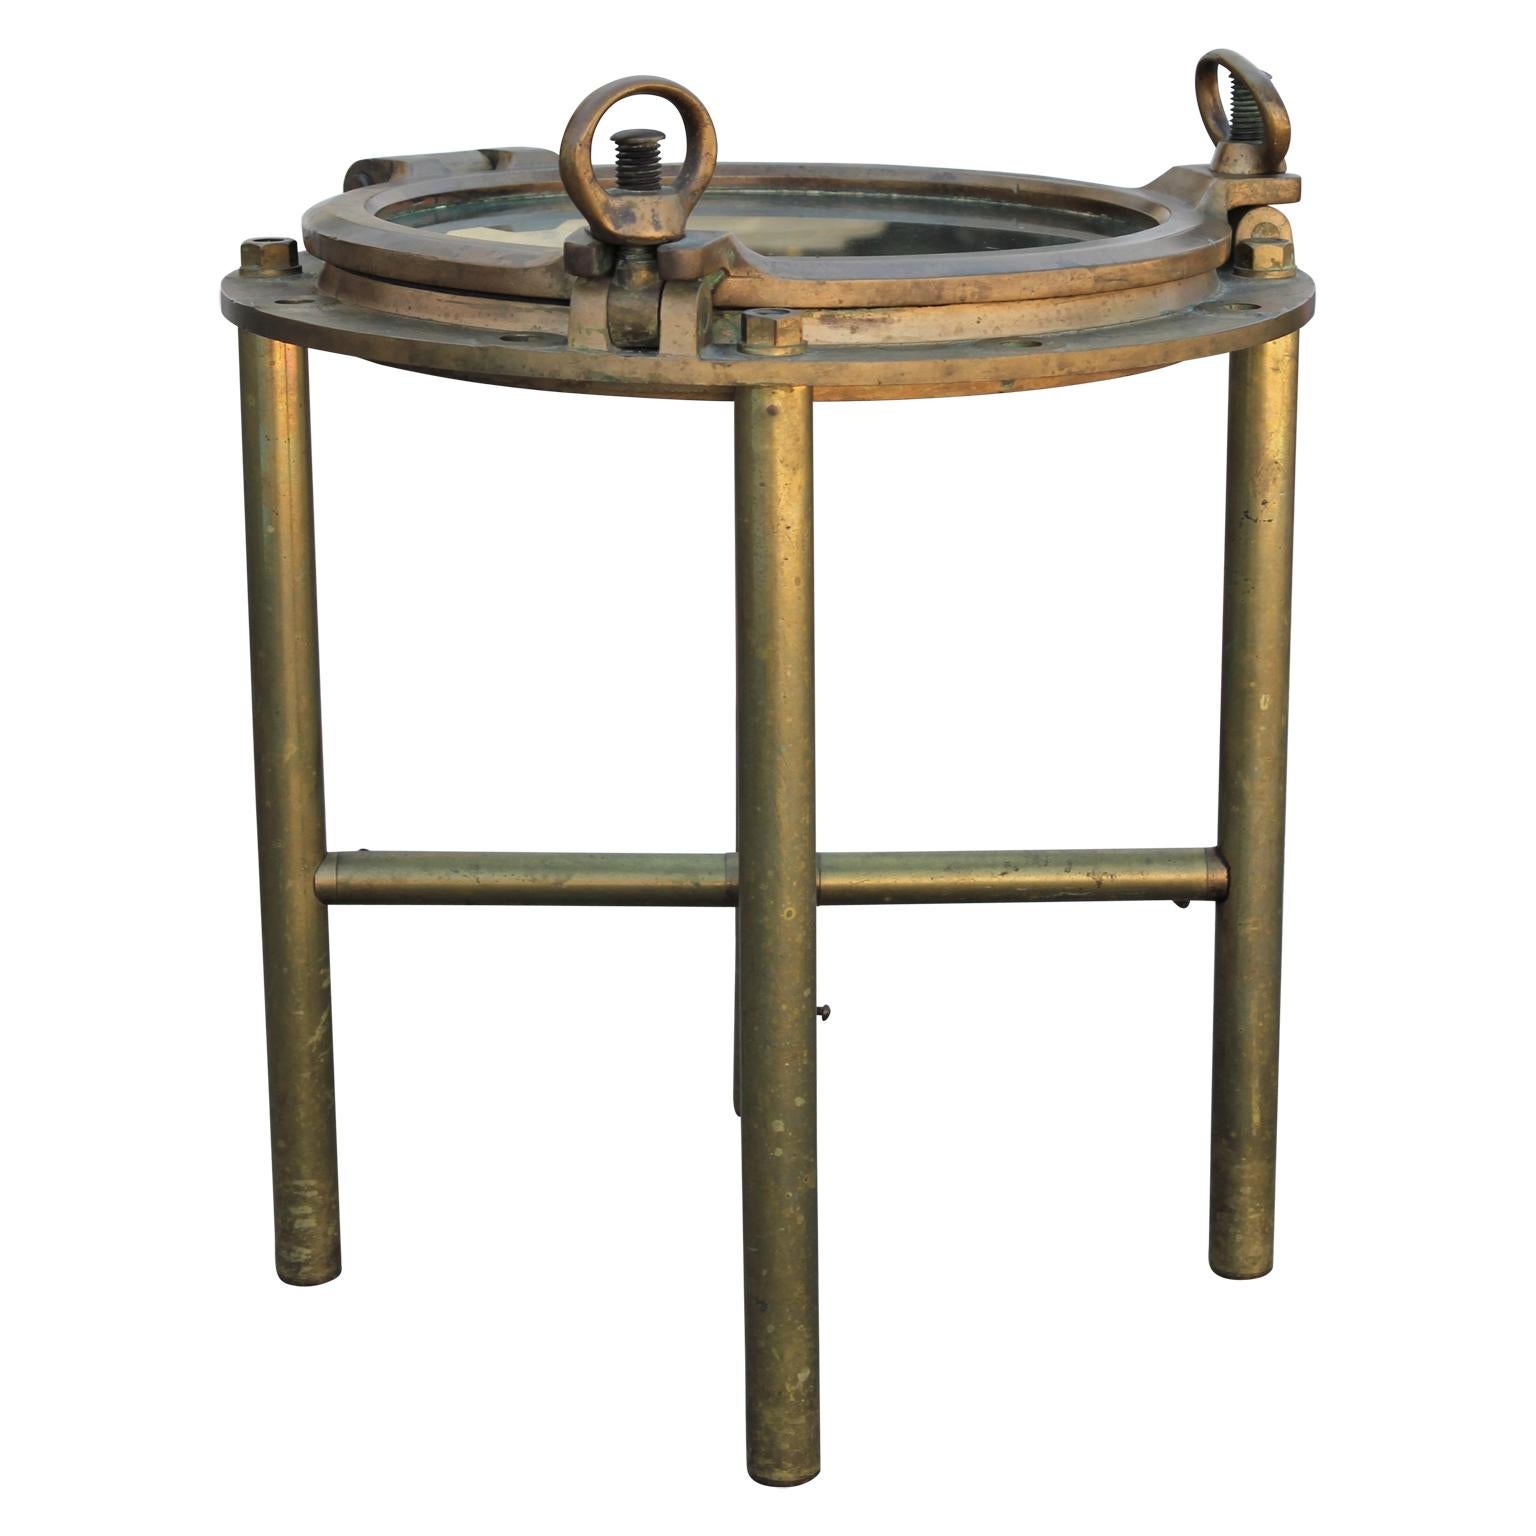 Stunning nautical modern brass heavy round porthole window side table. The porthole screws work as they should. Well crafted and has the perfect patina.